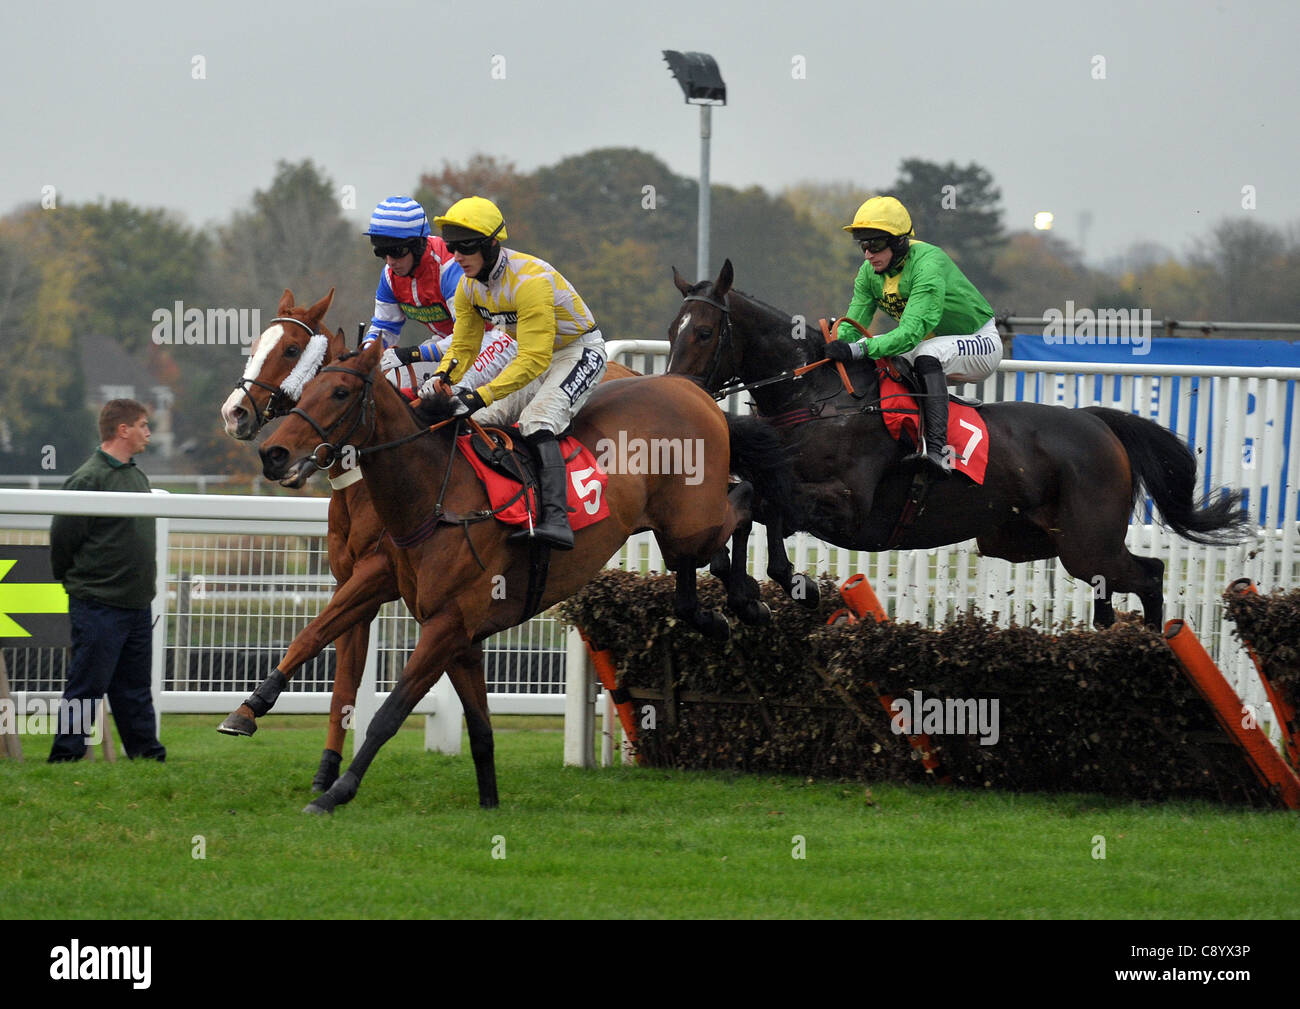 Pateese ridden by Matt Griffiths leads the field from Humide ridden by Johnny Farrelly and Tony Star ridden by Tom O'Brien in the Bet @bluesq.com Handicap Hurdle at Sandown Park Racecourse, Esher, Surrey - 05/11/2011 - MANDATORY CREDIT: Martin Dalton/TGSPHOTO - Self billing applies where appropriate Stock Photo